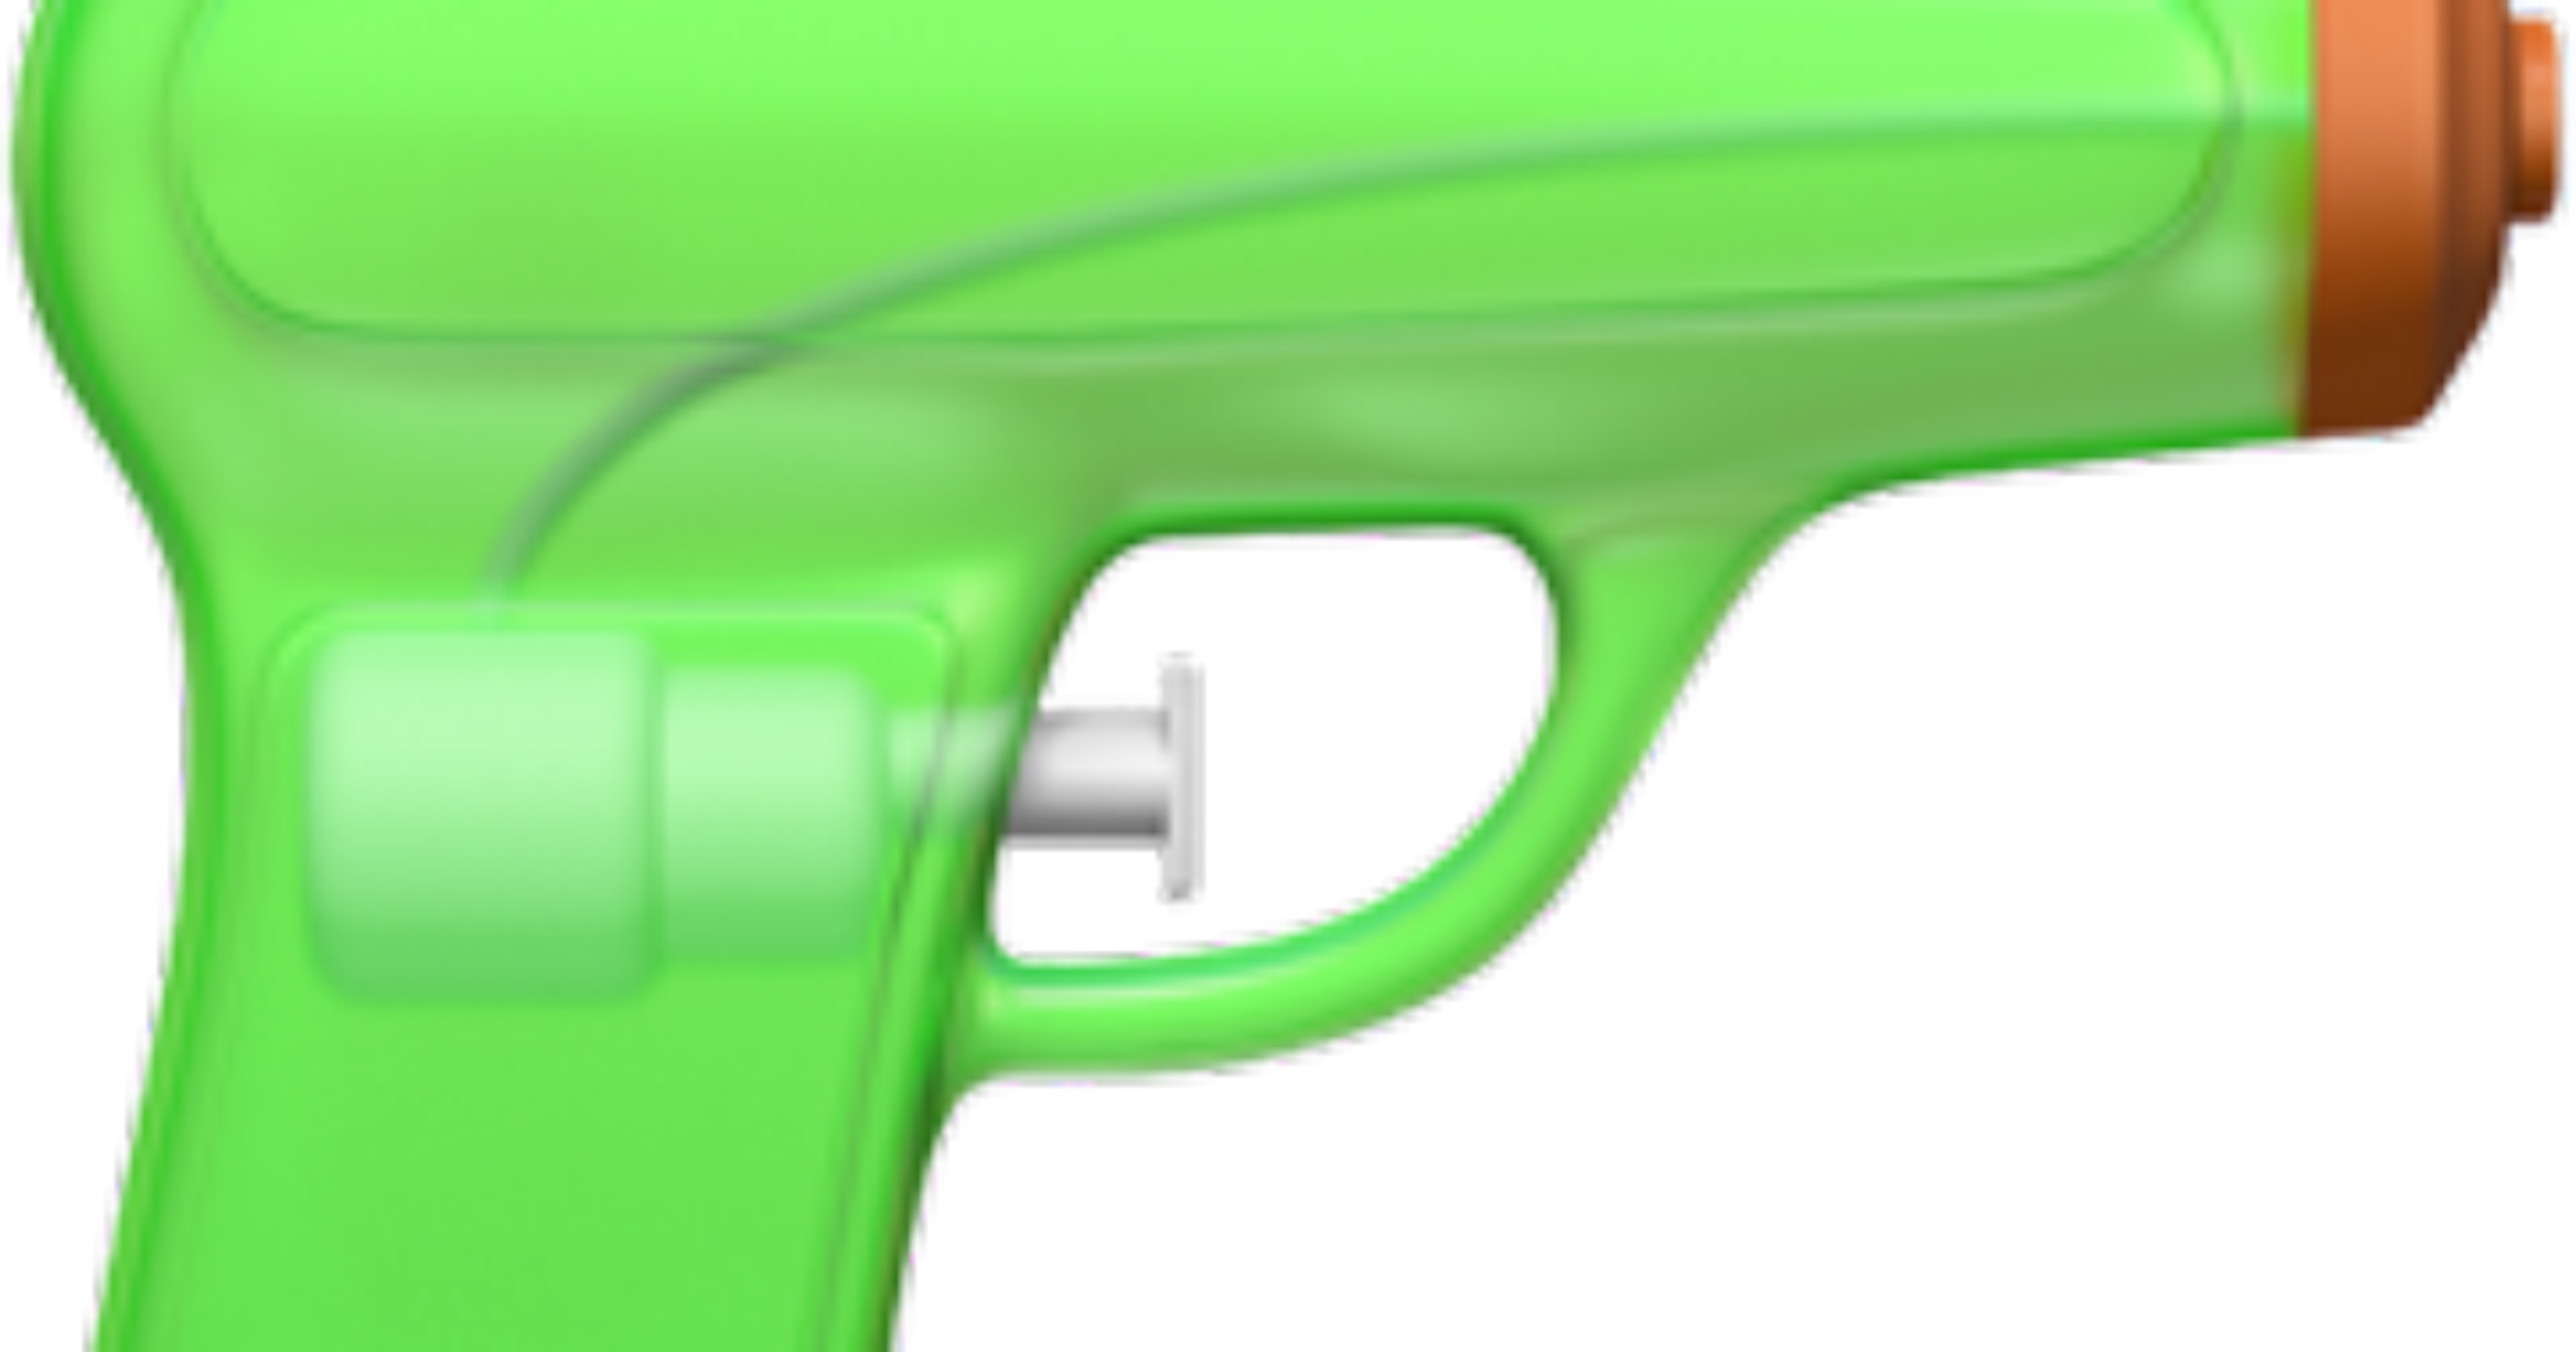 Apple Replaces Pistol Emoji With A Lime Green Squirt - Squirt Gun Emoji (3200x1680)